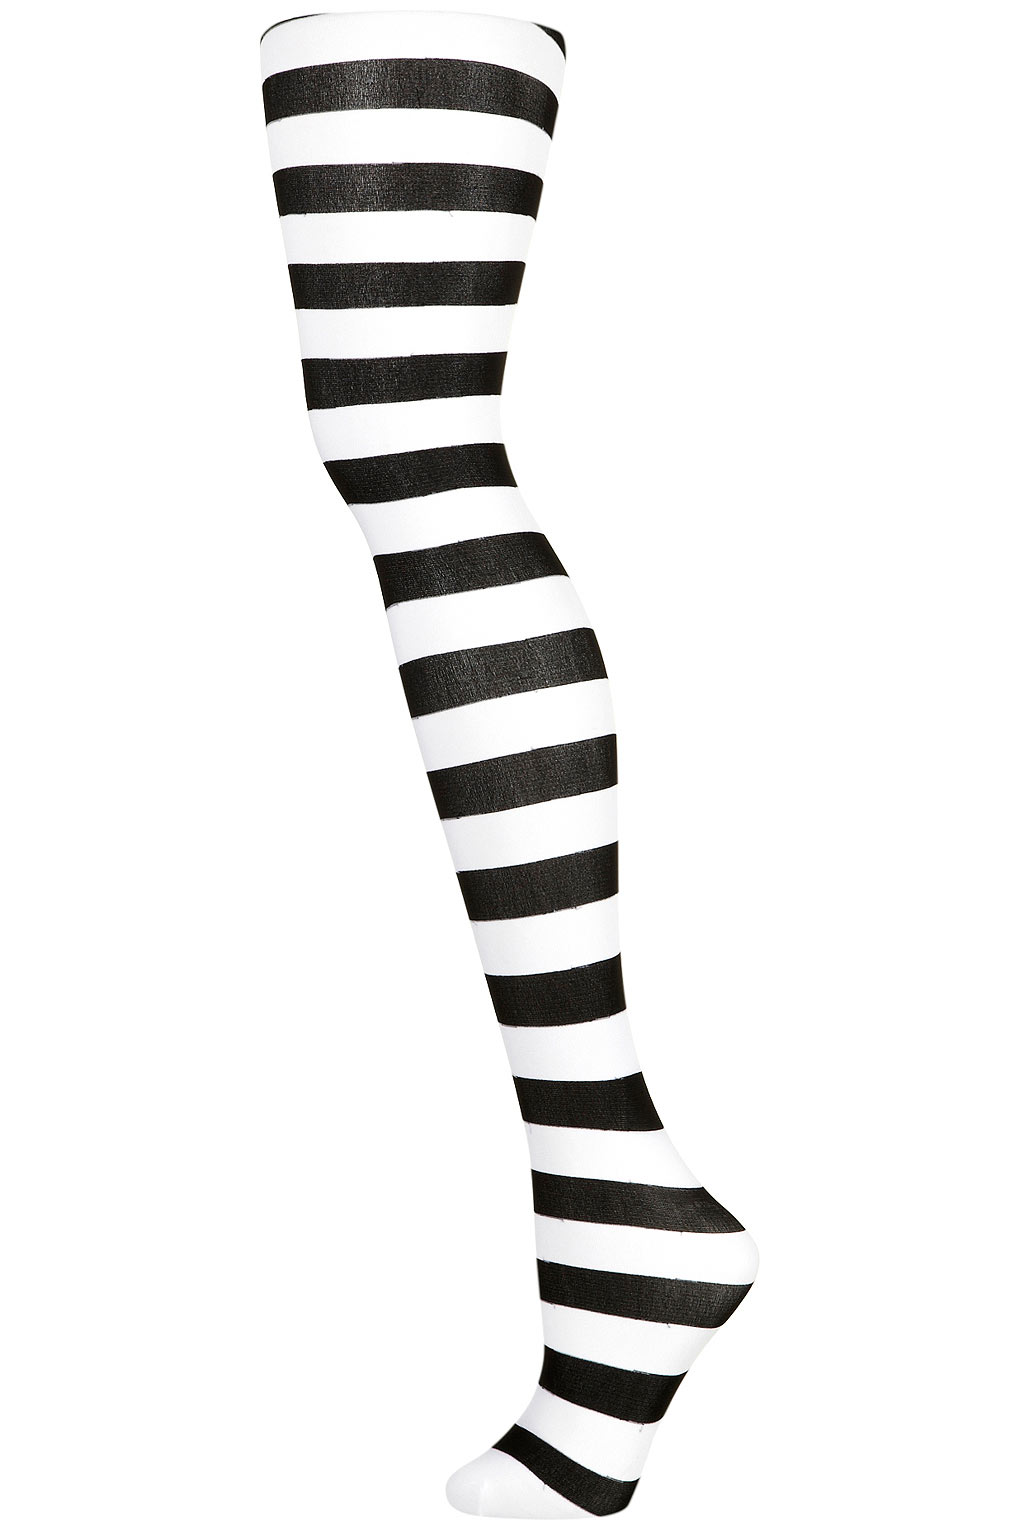 Lyst - Topshop Black and White Stripe Tights in Black